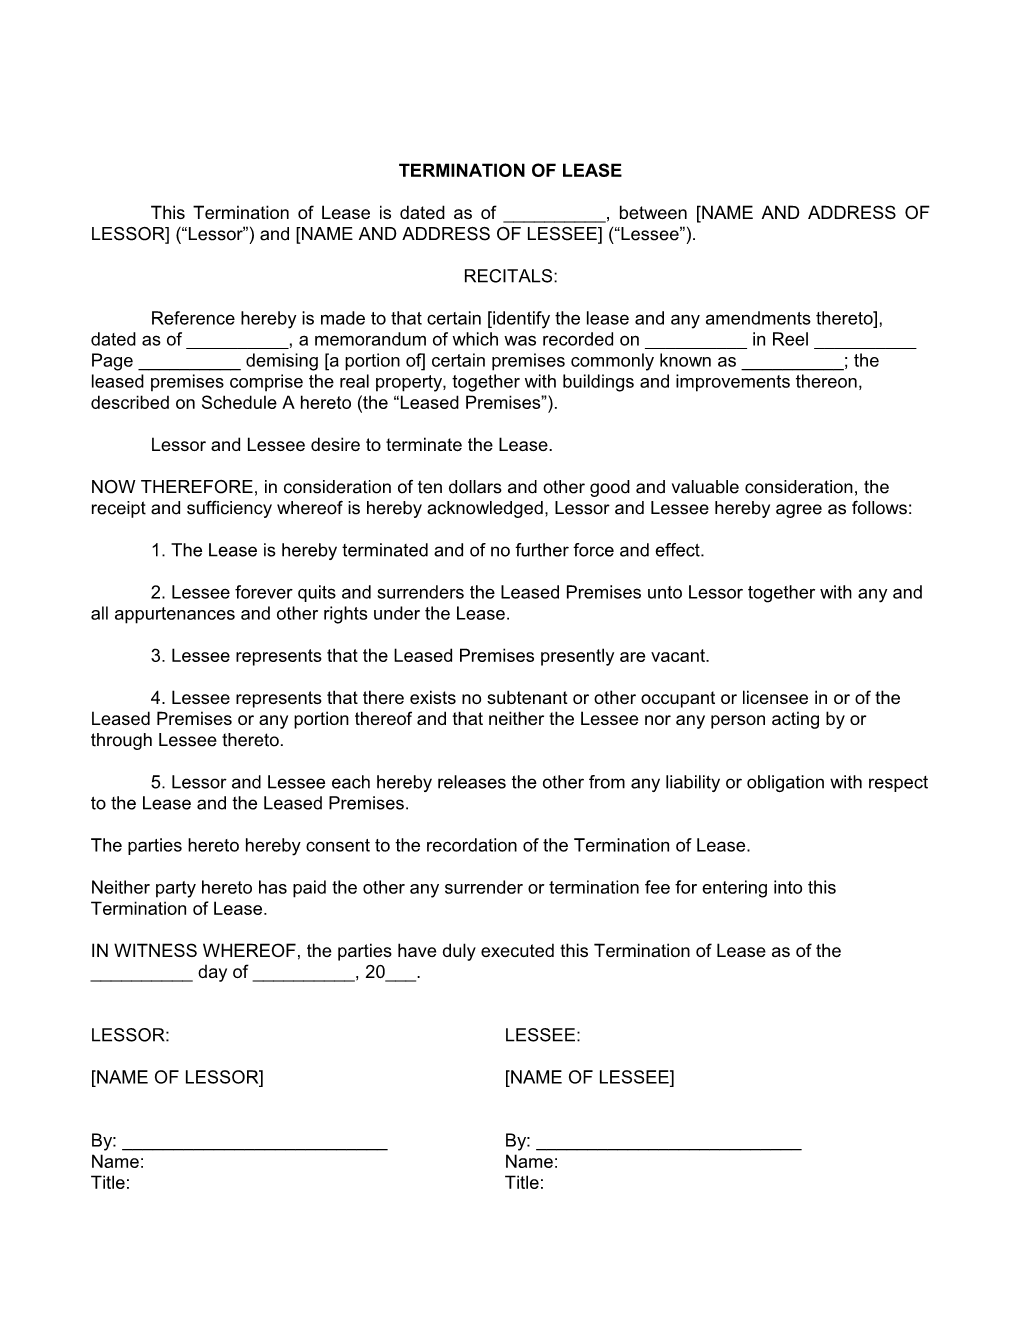 Termination of Lease